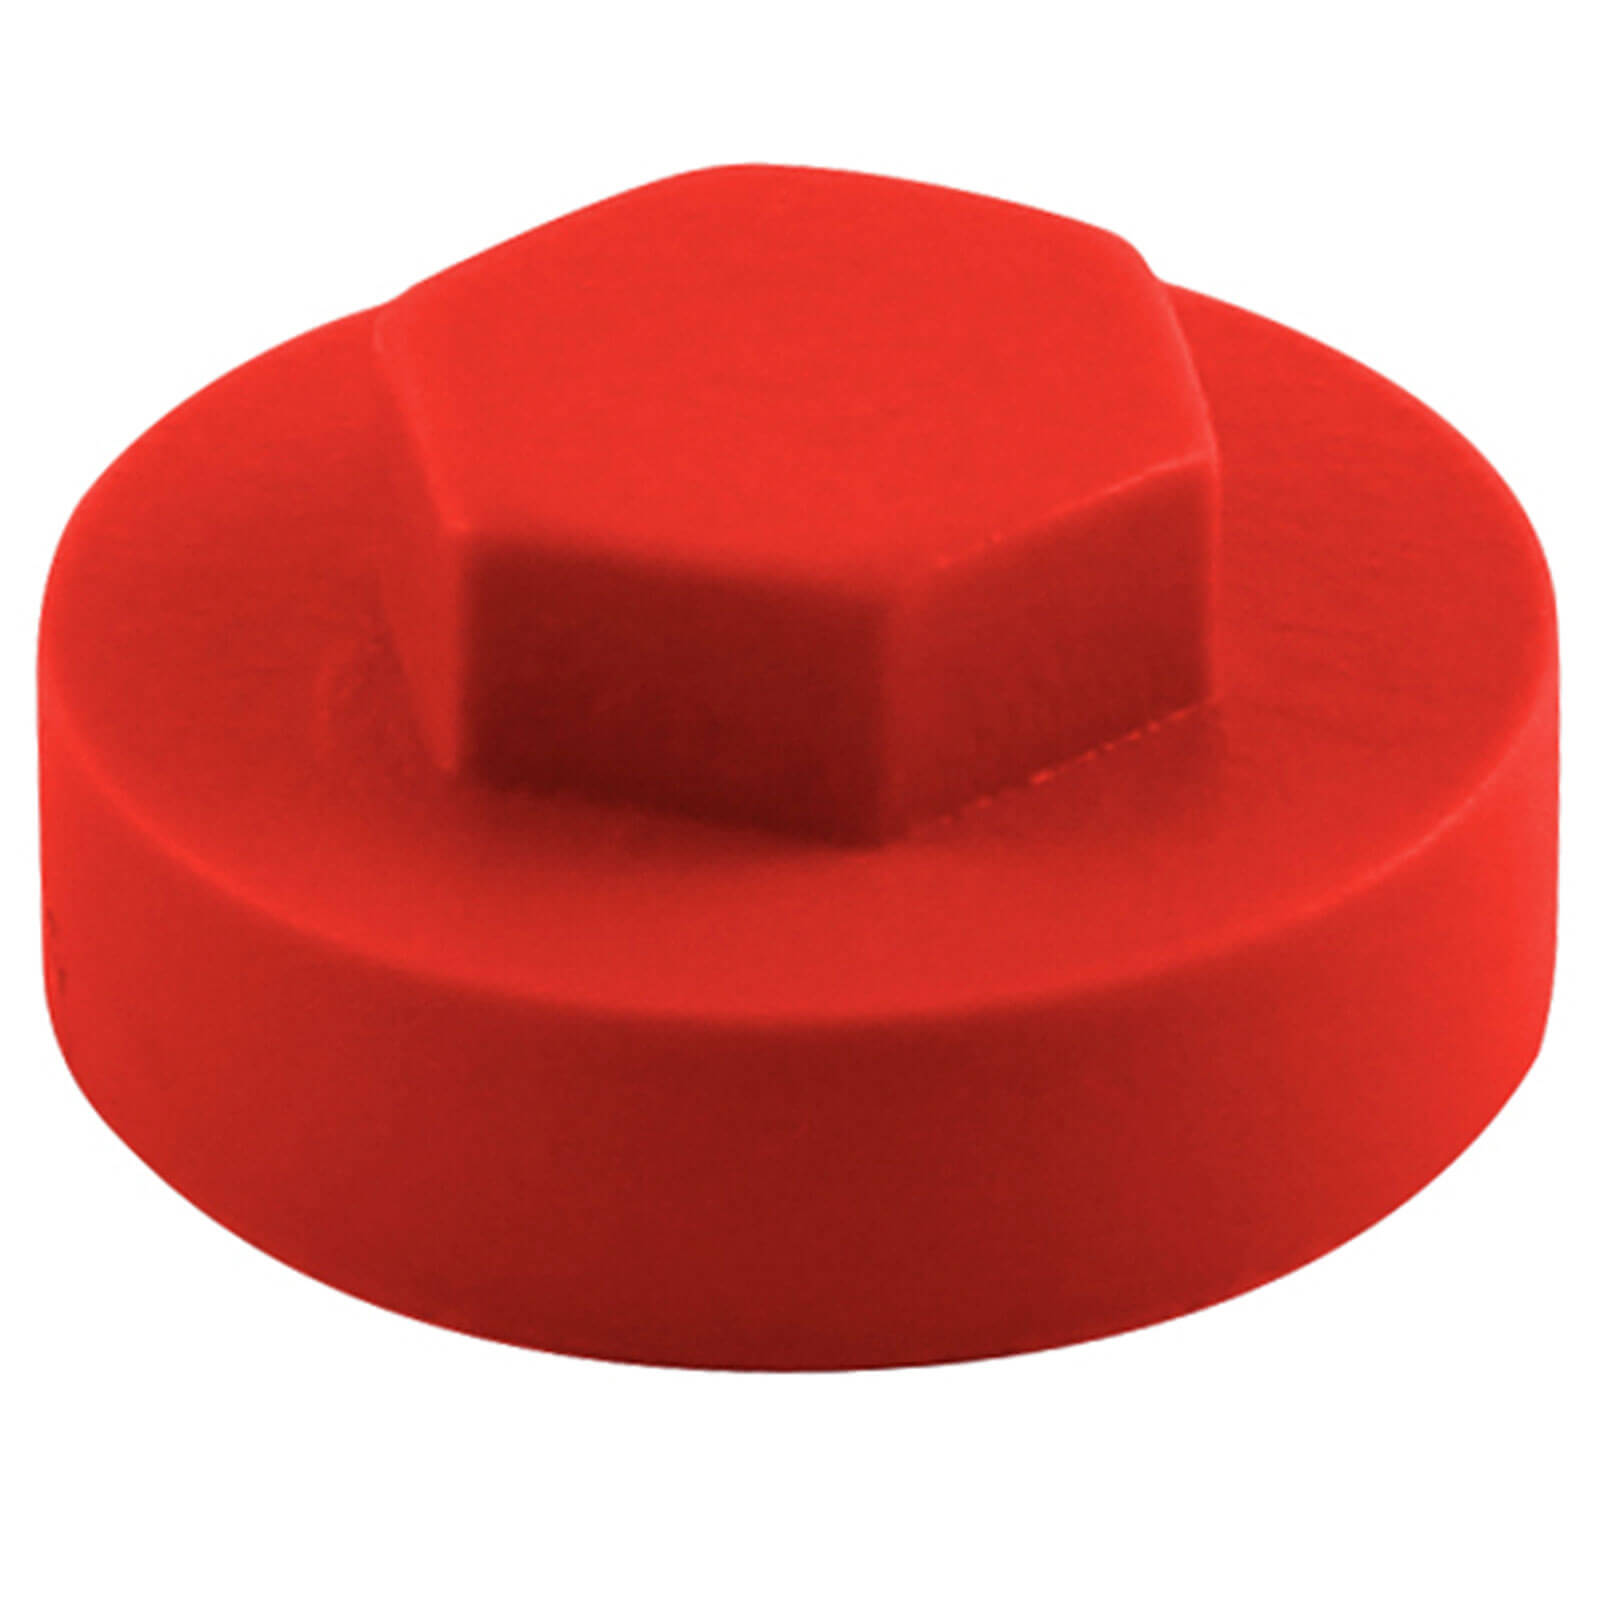 Image of Colour Match Hexagon Screw Cover Cap 5/16" x 16mm Poppy Red Pack of 1000